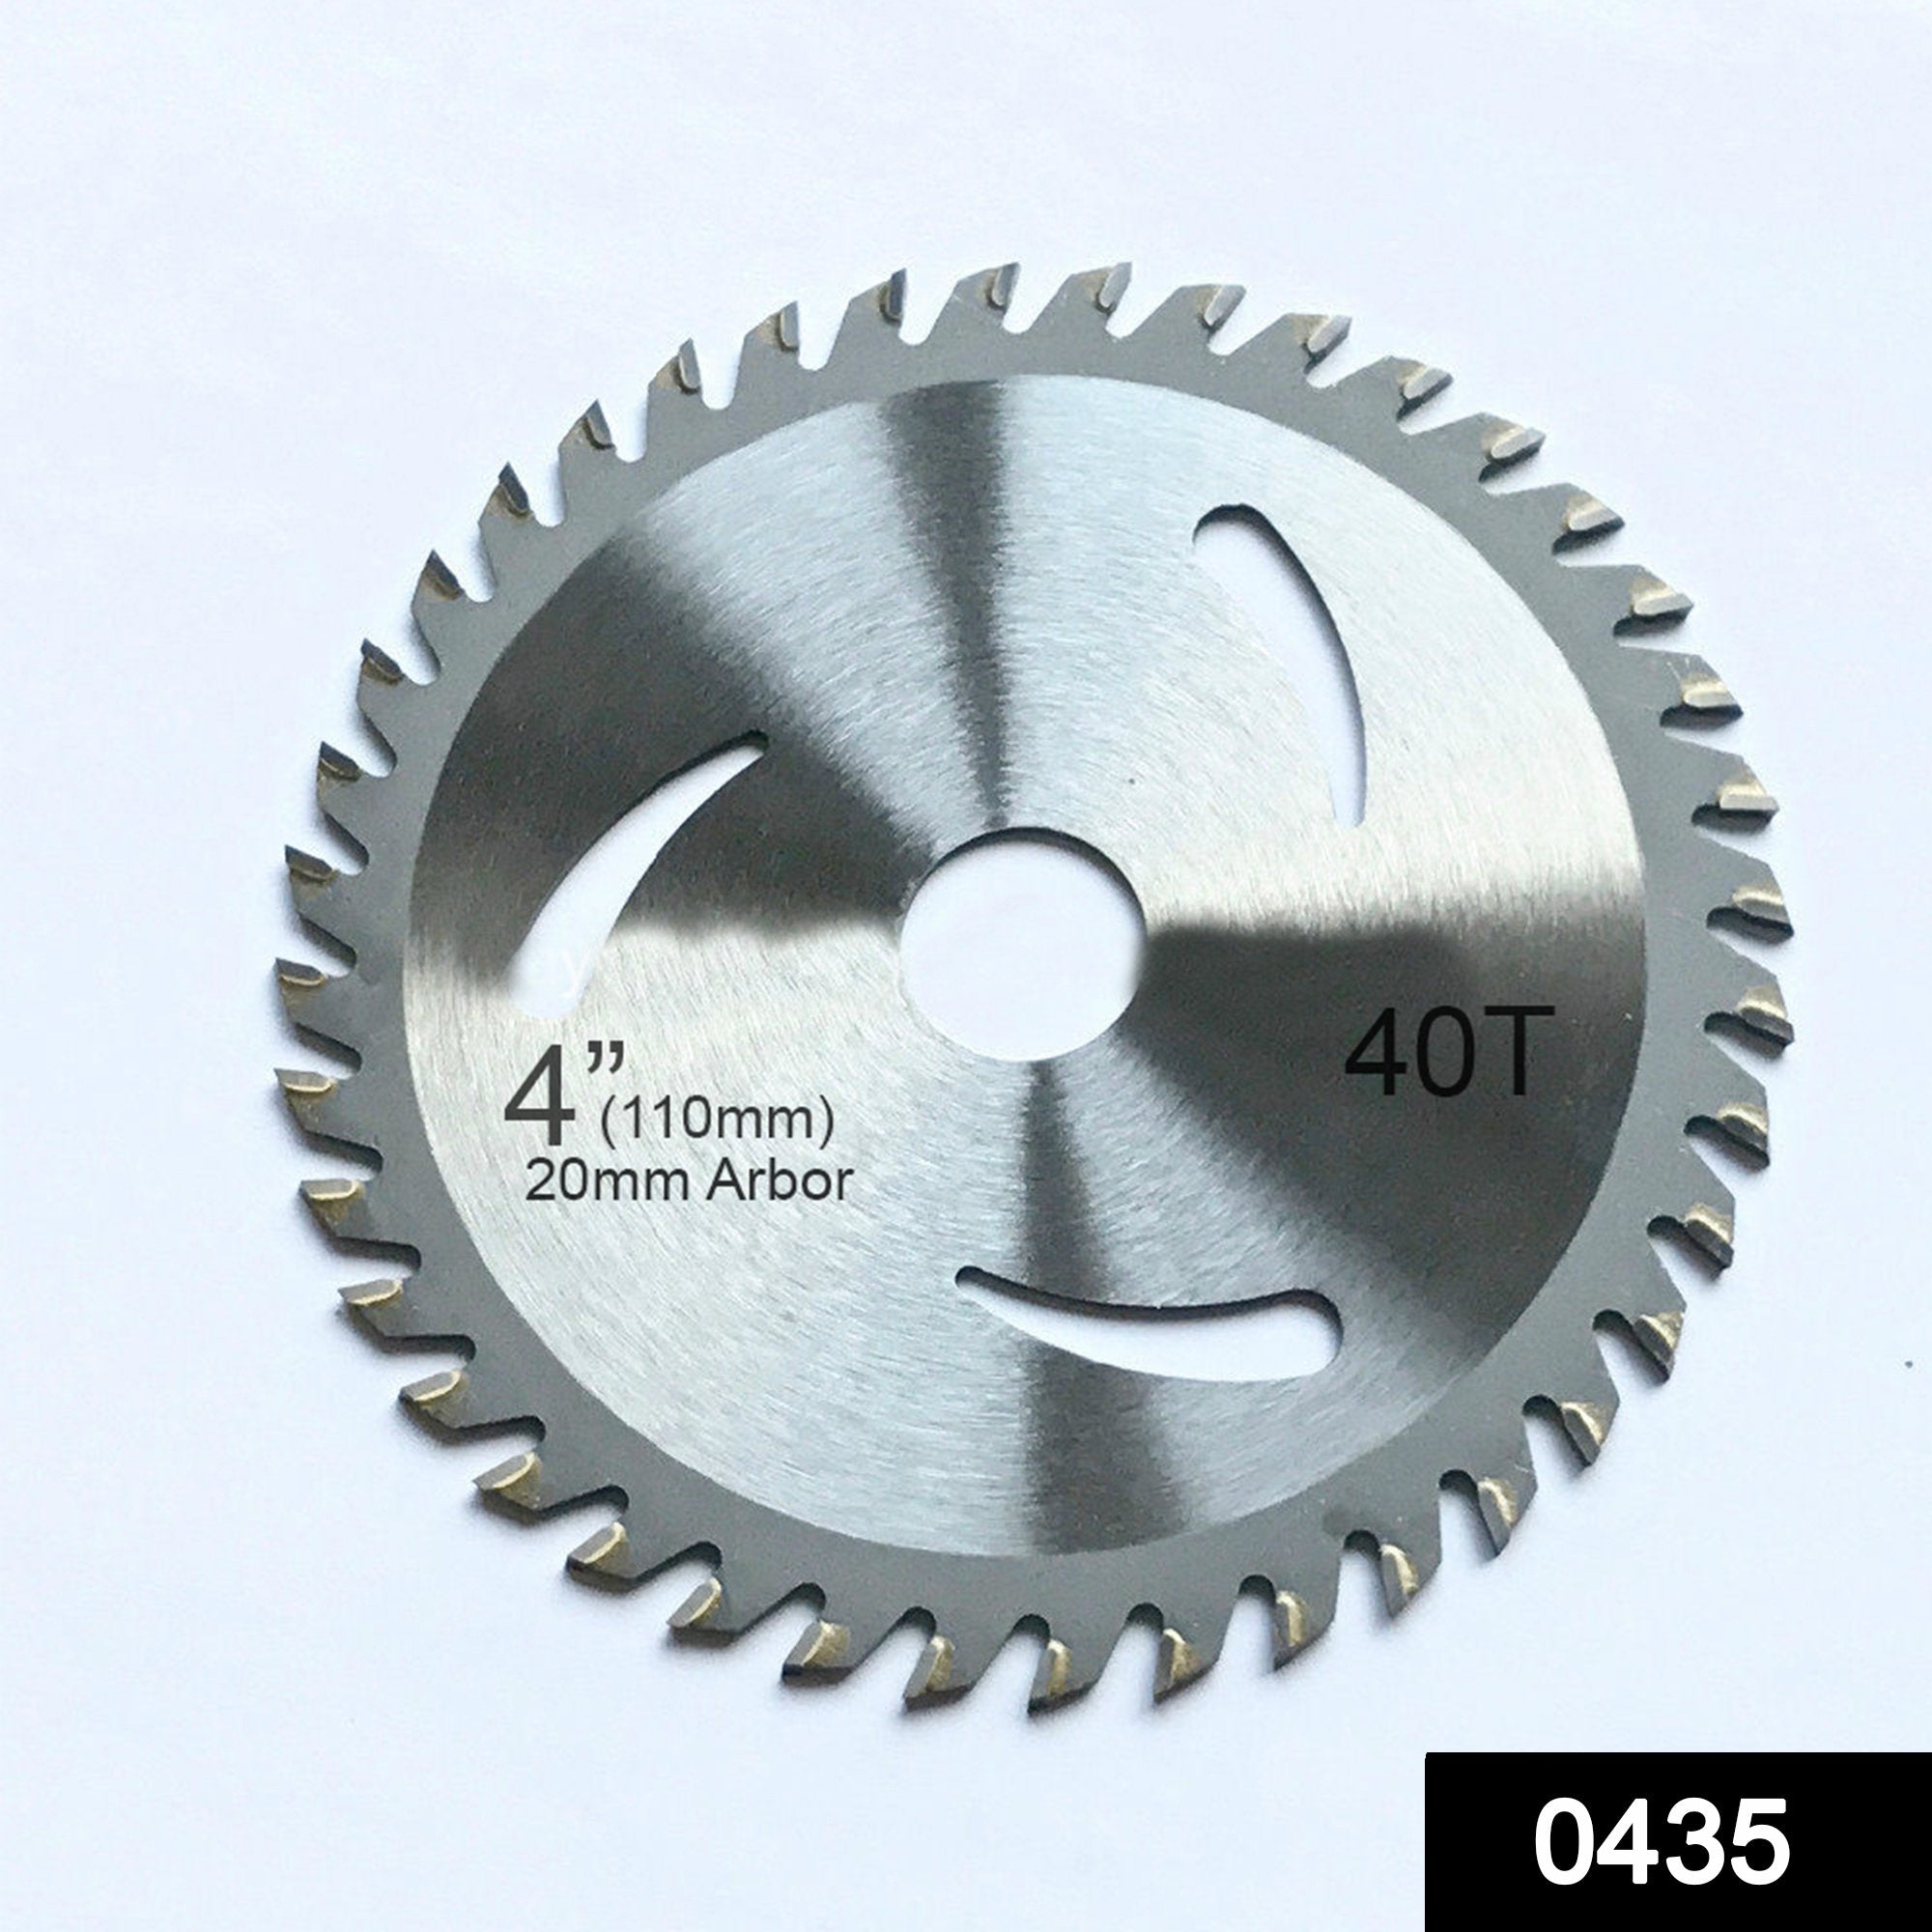 ambitionofcreativity in professiona power tool ultra thin cutting disc 4 inch super thin diamond saw blade for cutting porcelain tiles granite marble ceramics 4